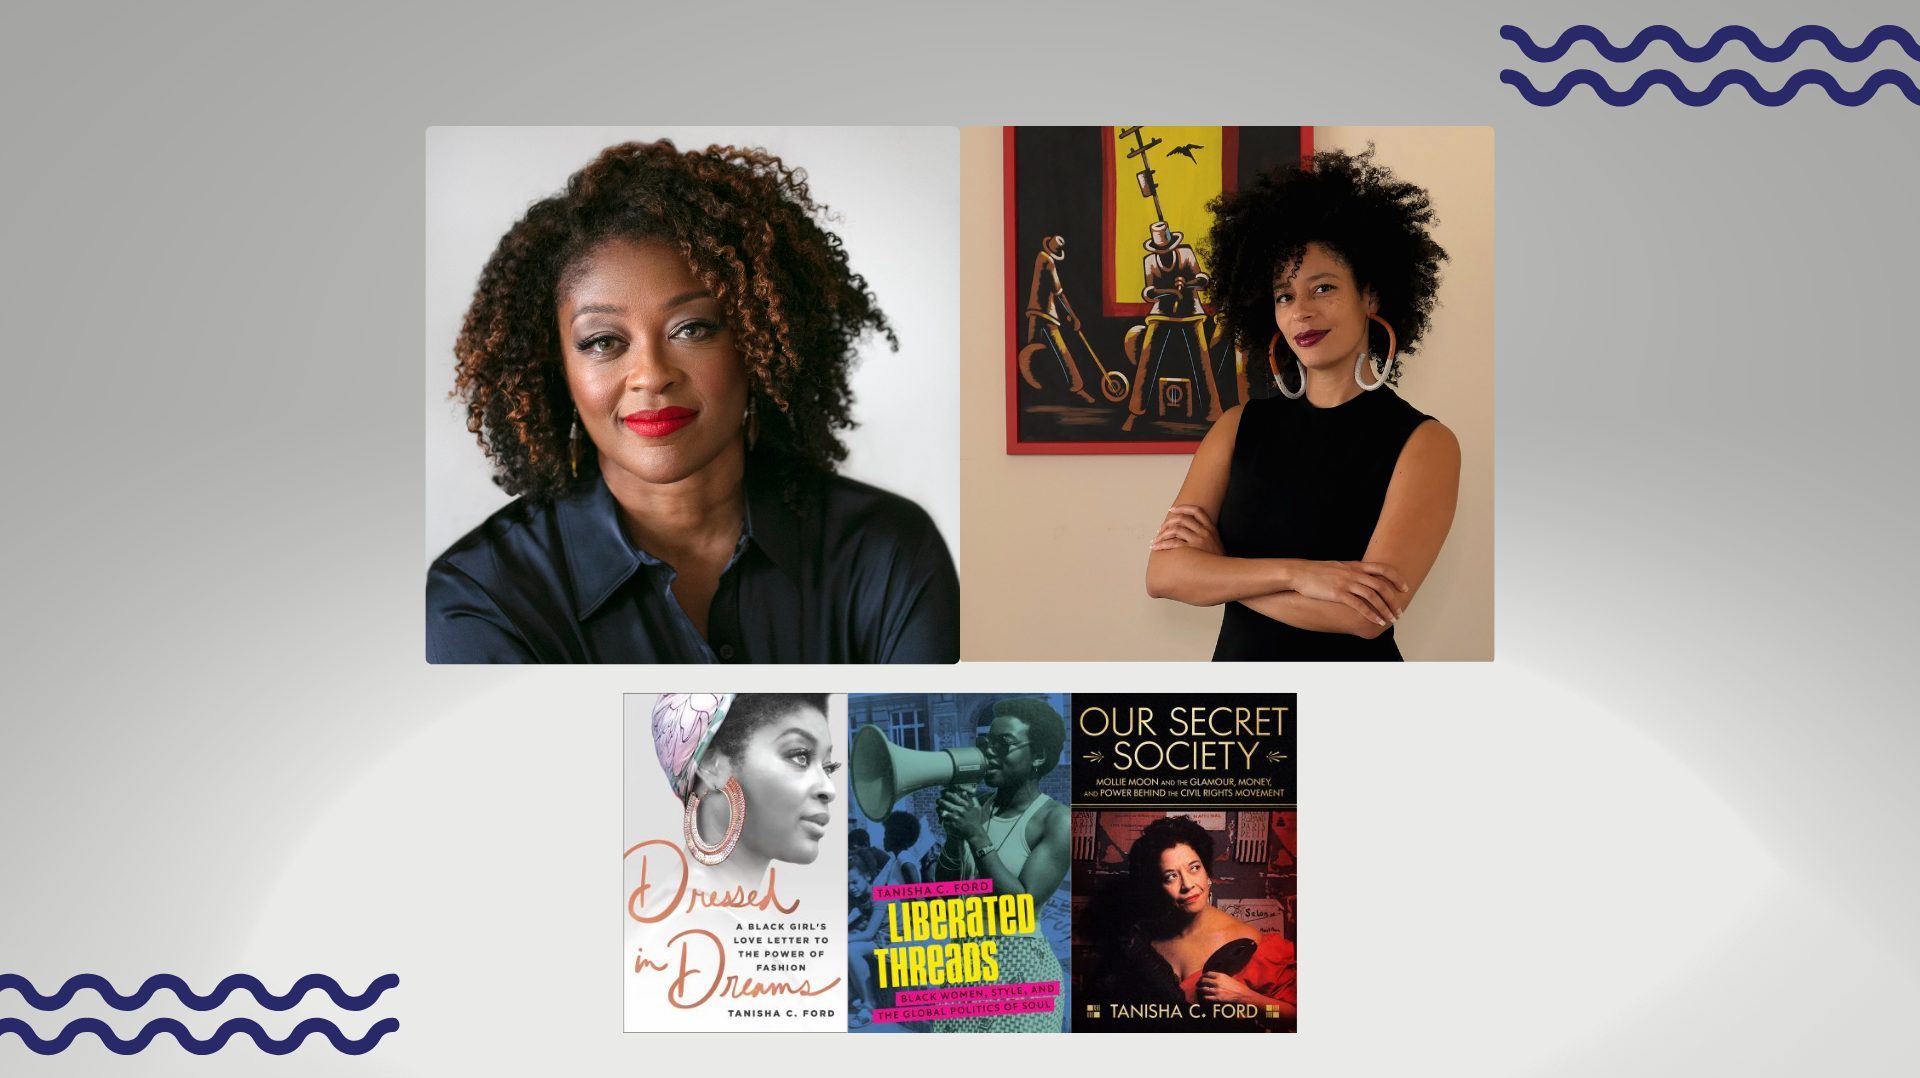 Author: Dr. Tanisha C. Ford in Conversation with Dr. Tiffany E. Barber, African American Women and Fashion